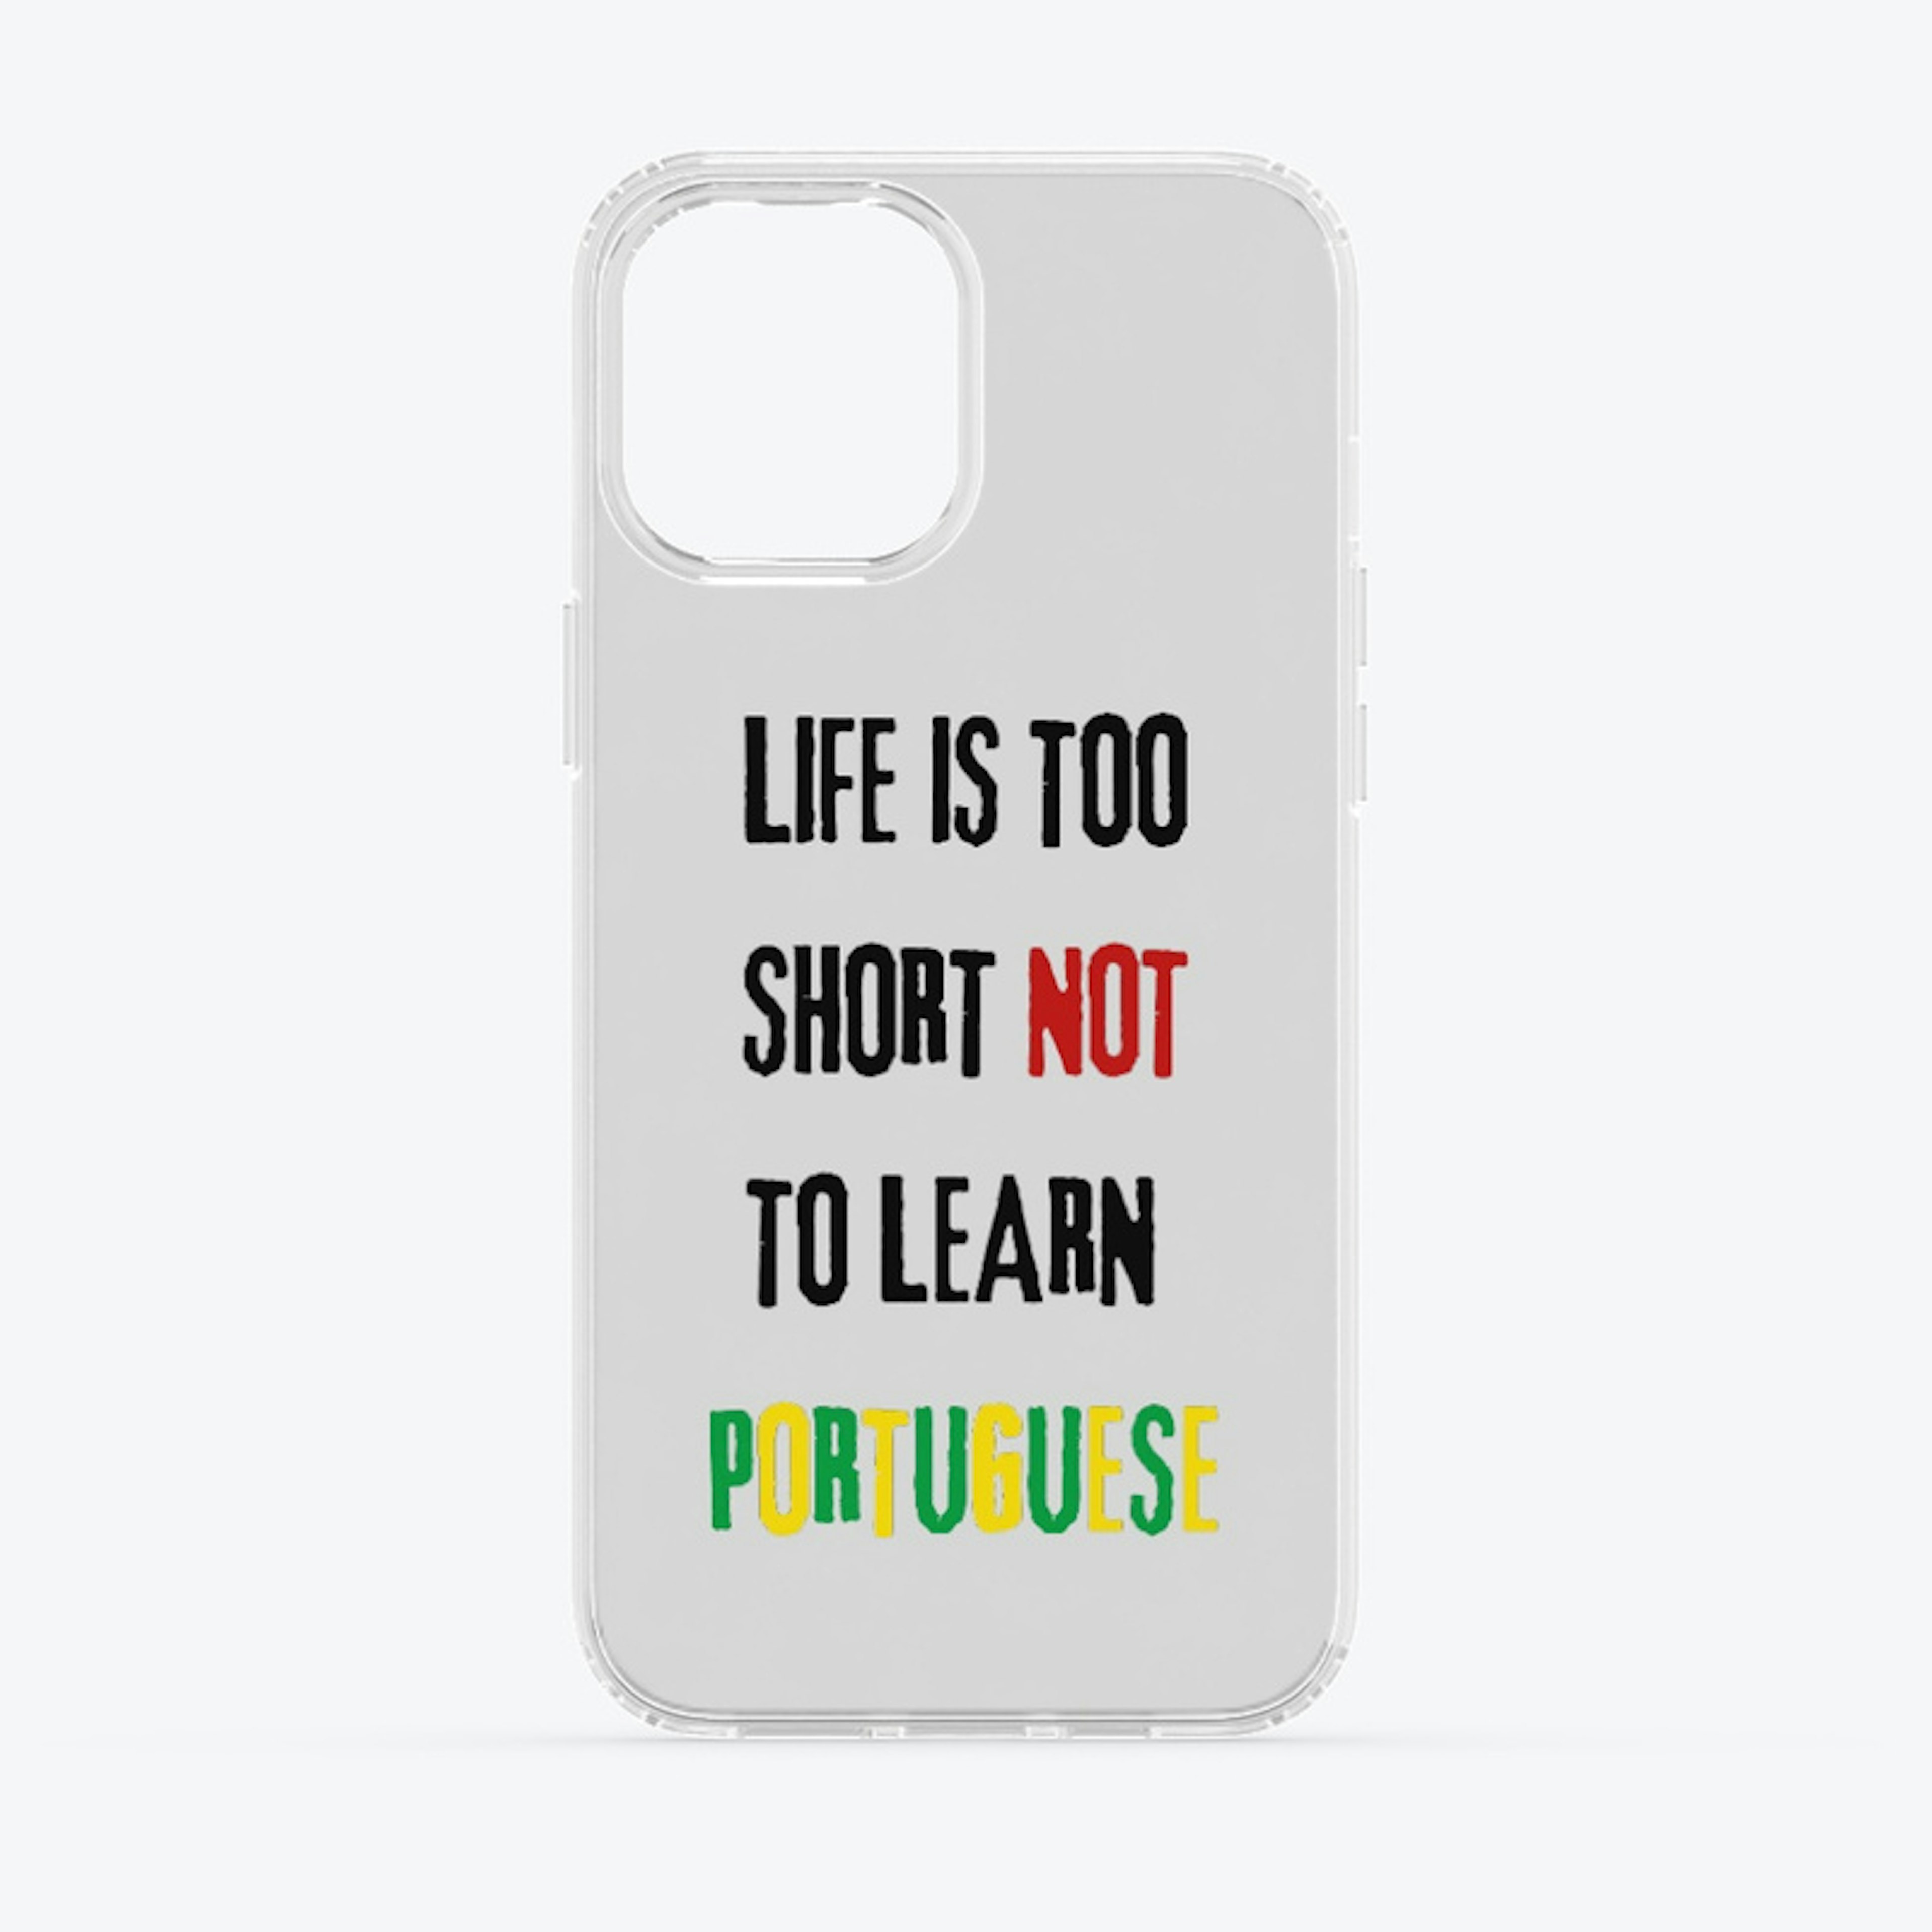 Life is short NOT to learn Portuguese